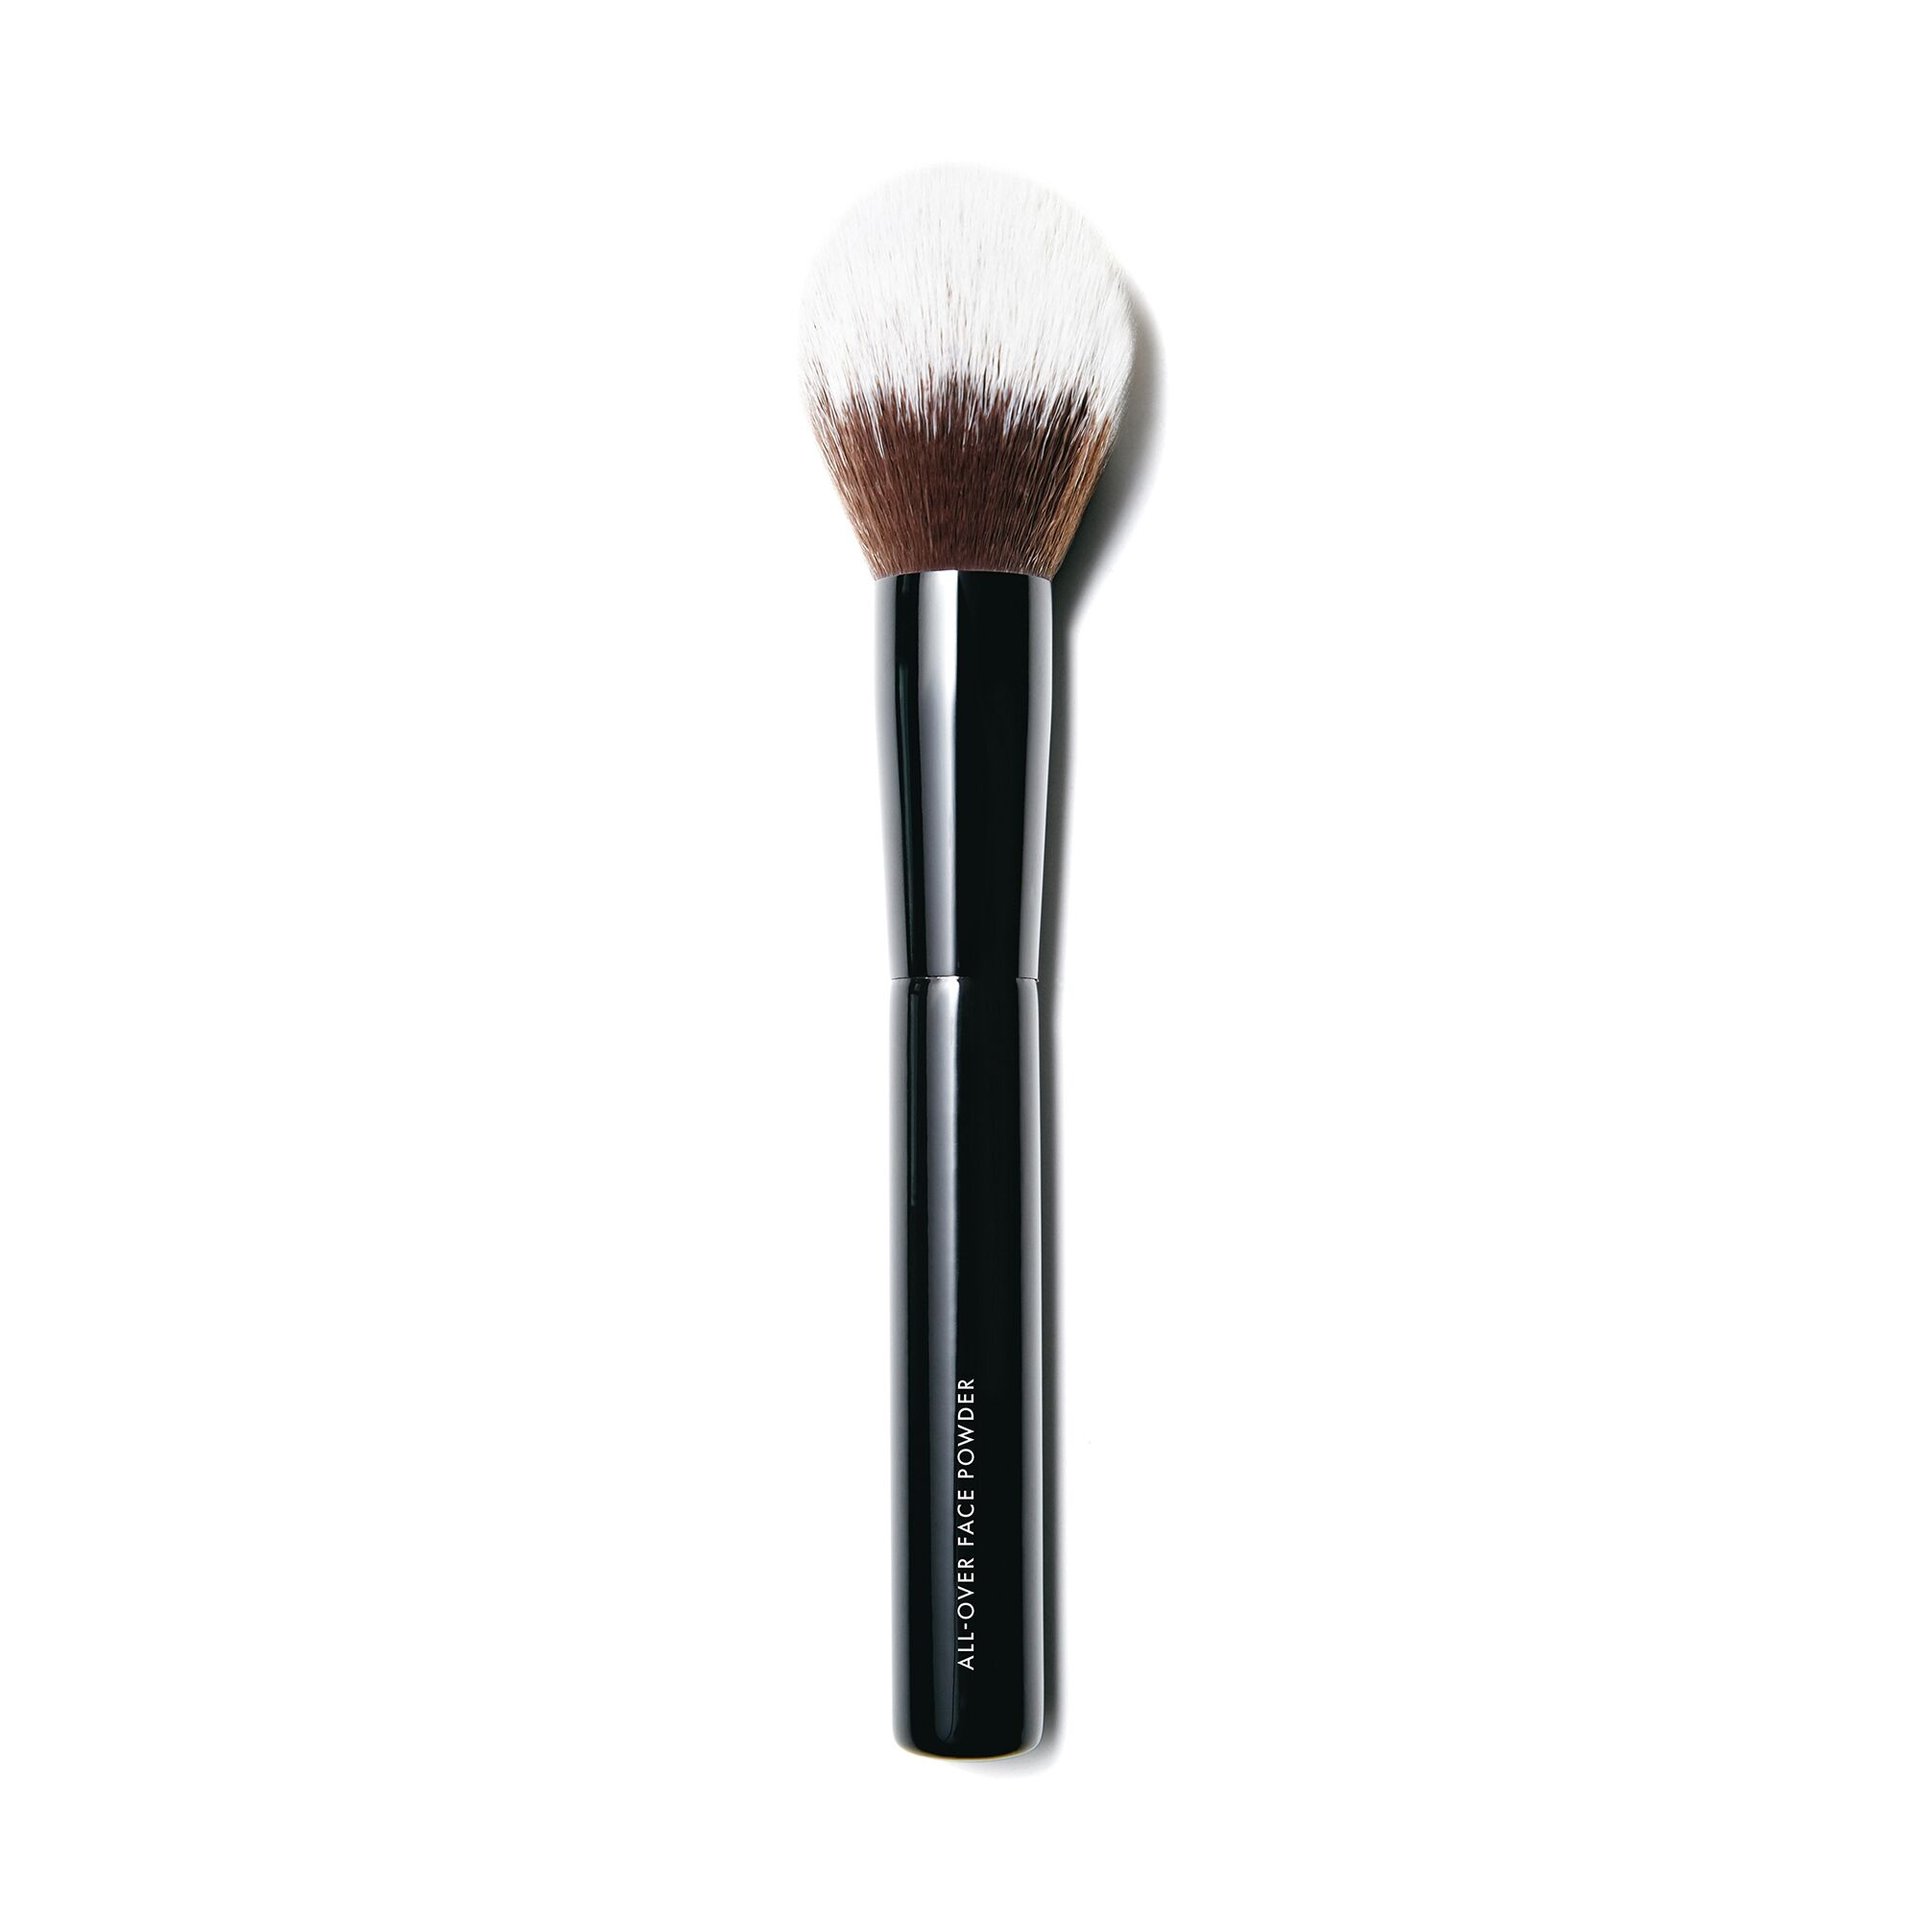 Large All-over Face Powder Brush